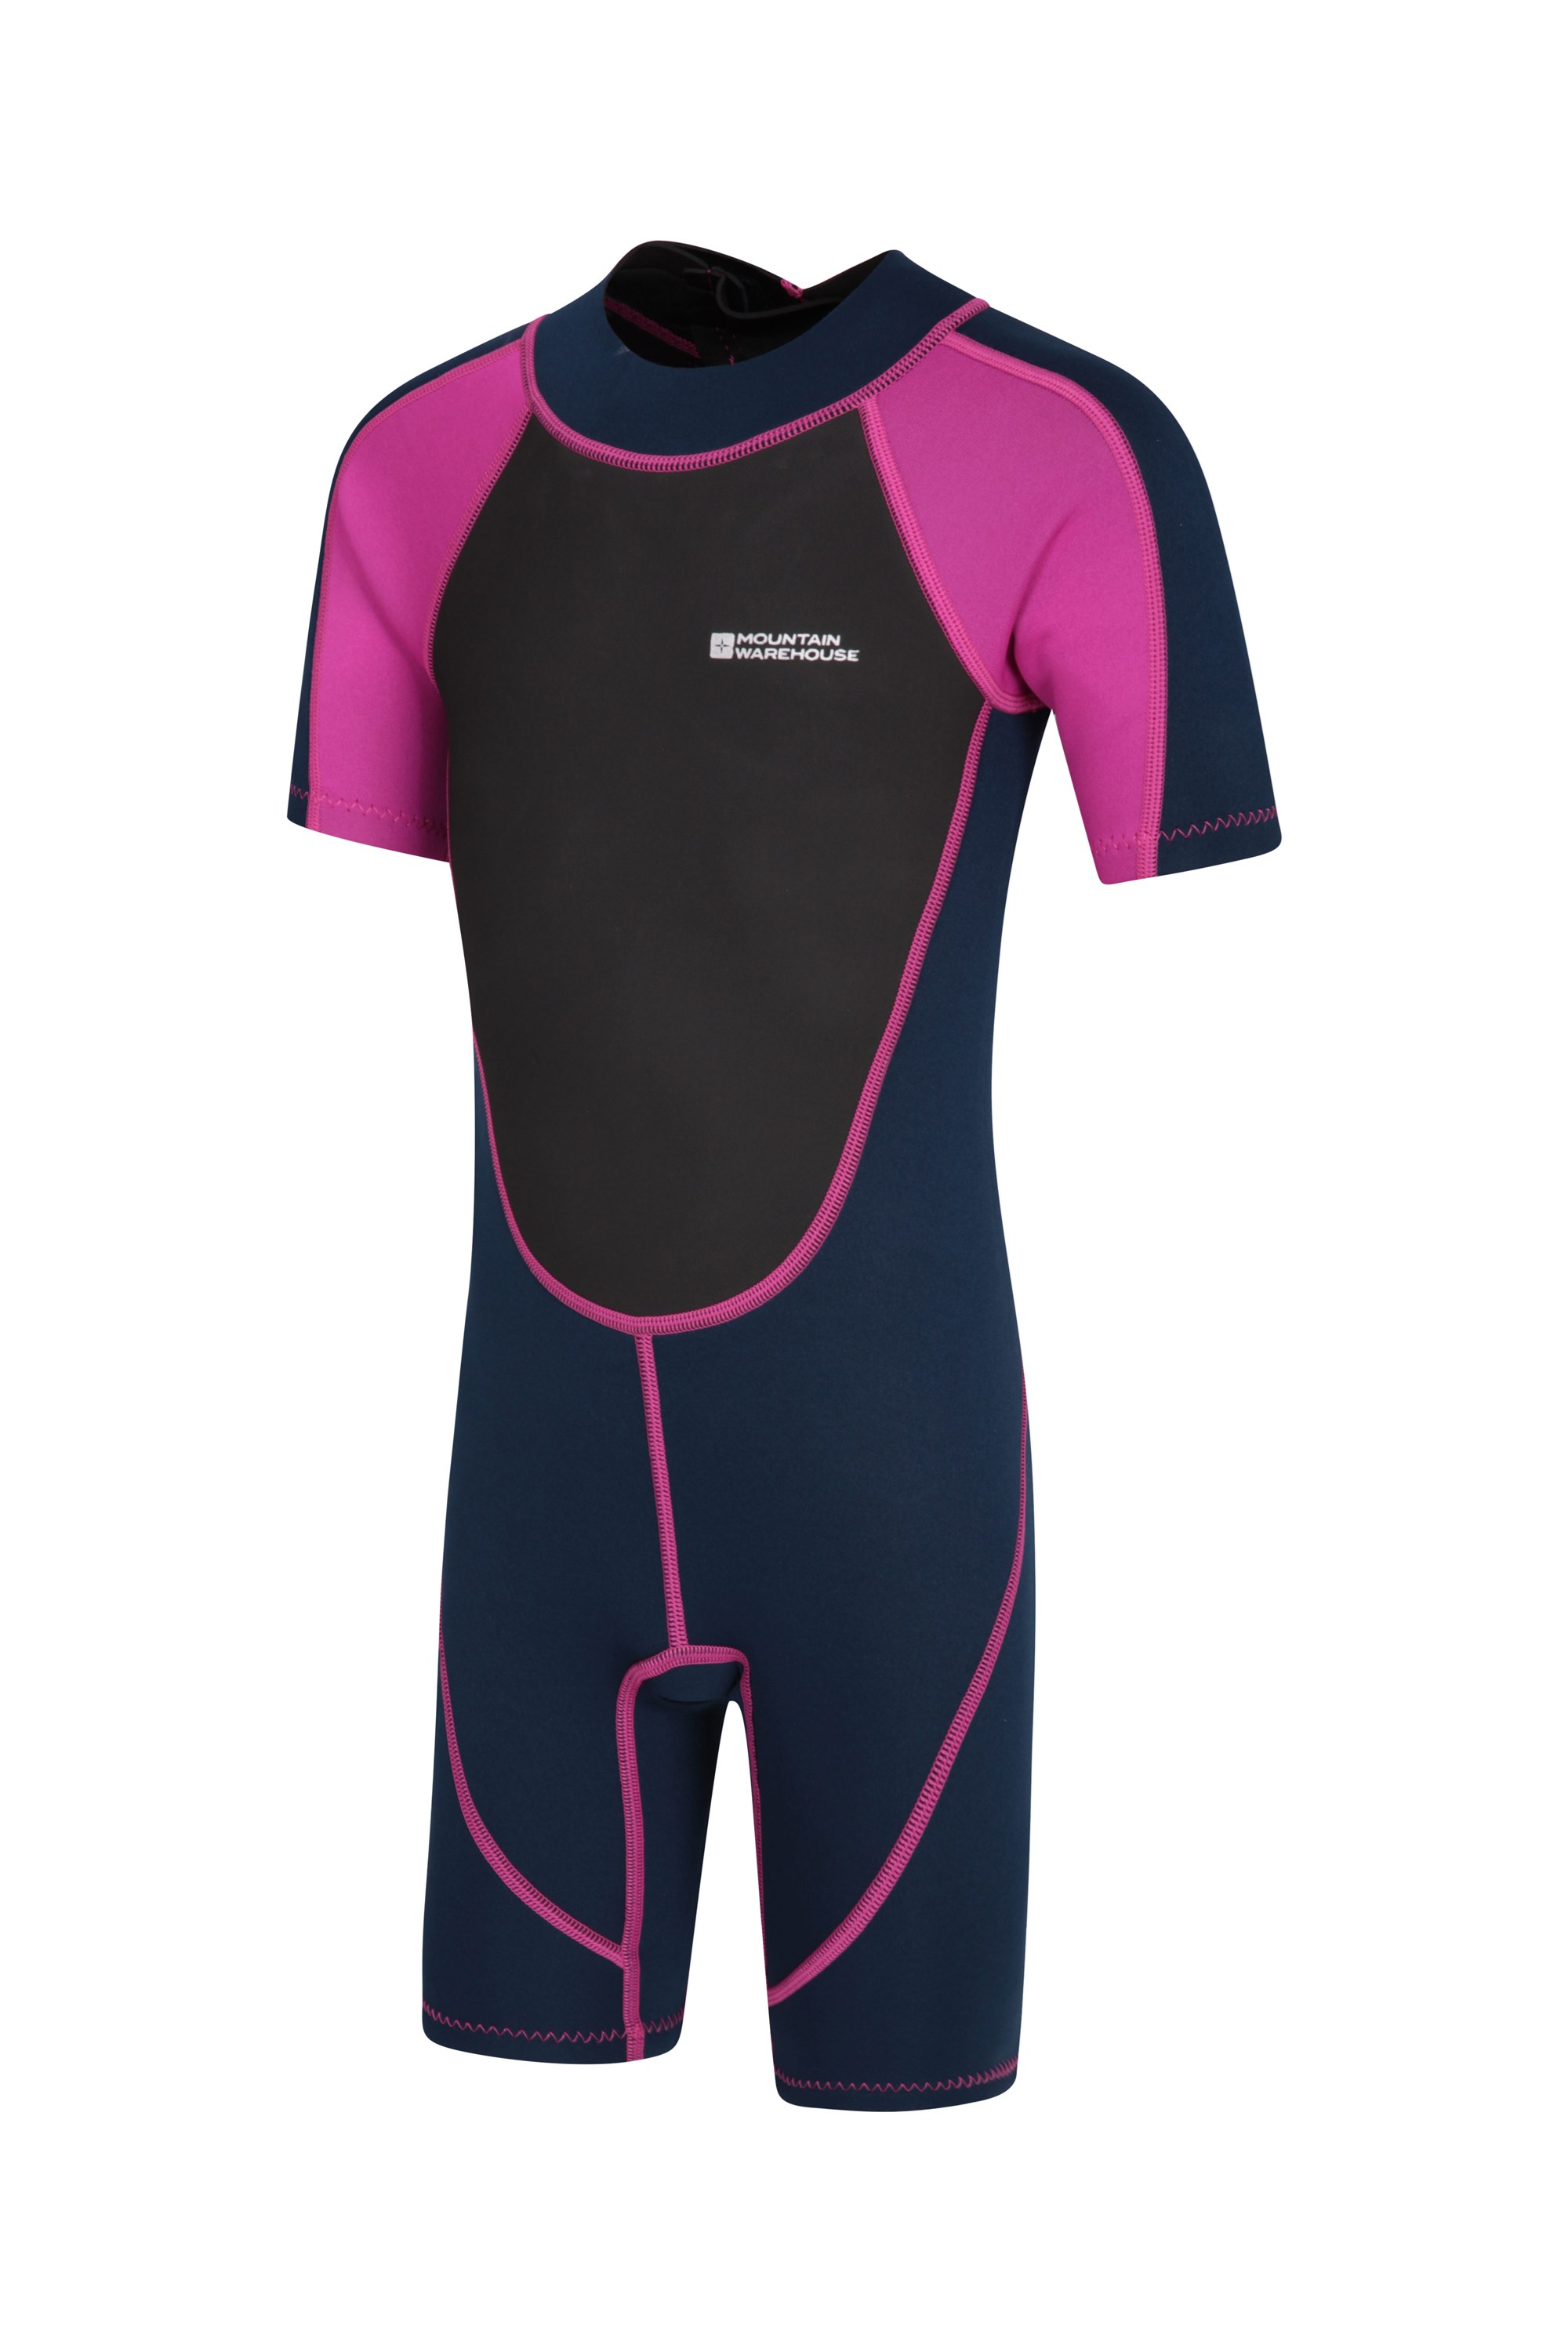 Mountain Warehouse Junior Shorty Wetsuit for Diving Neoprene Kids Wetsuit Flat Seams Childrens Wetsuit Easy Glide Zip Summer Wetsuit Adjustable Neck Swimming Suit